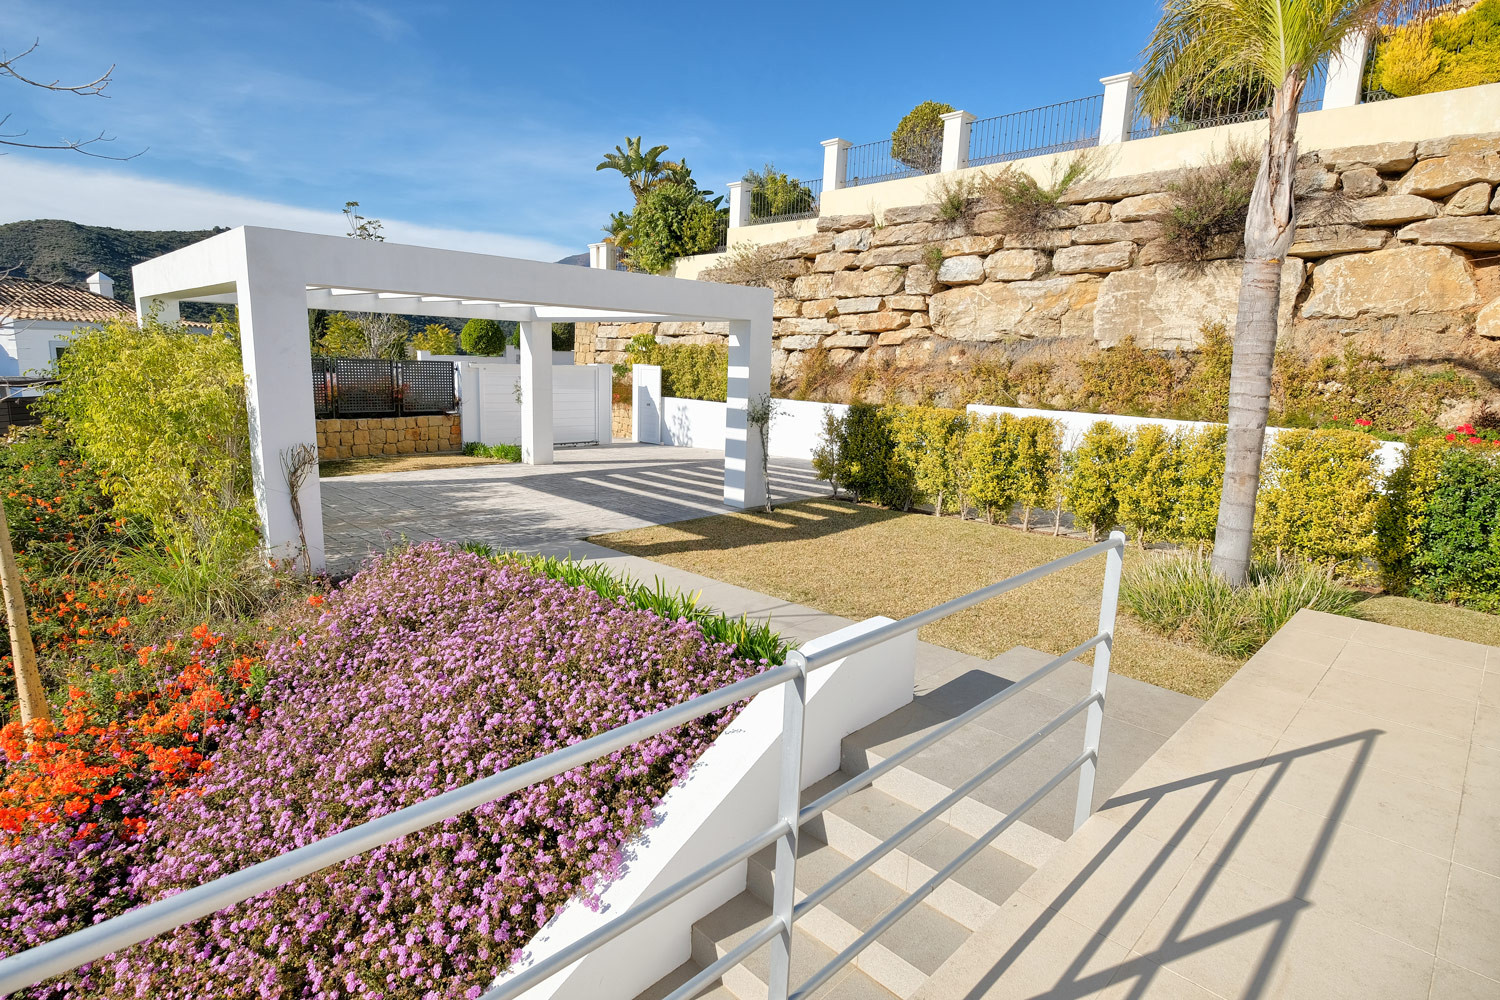 Newly built, contemporary, 5 bedroom quality villa in Puerto del Capitan, Benahavis. South/west facing with beautiful sea and mountain views